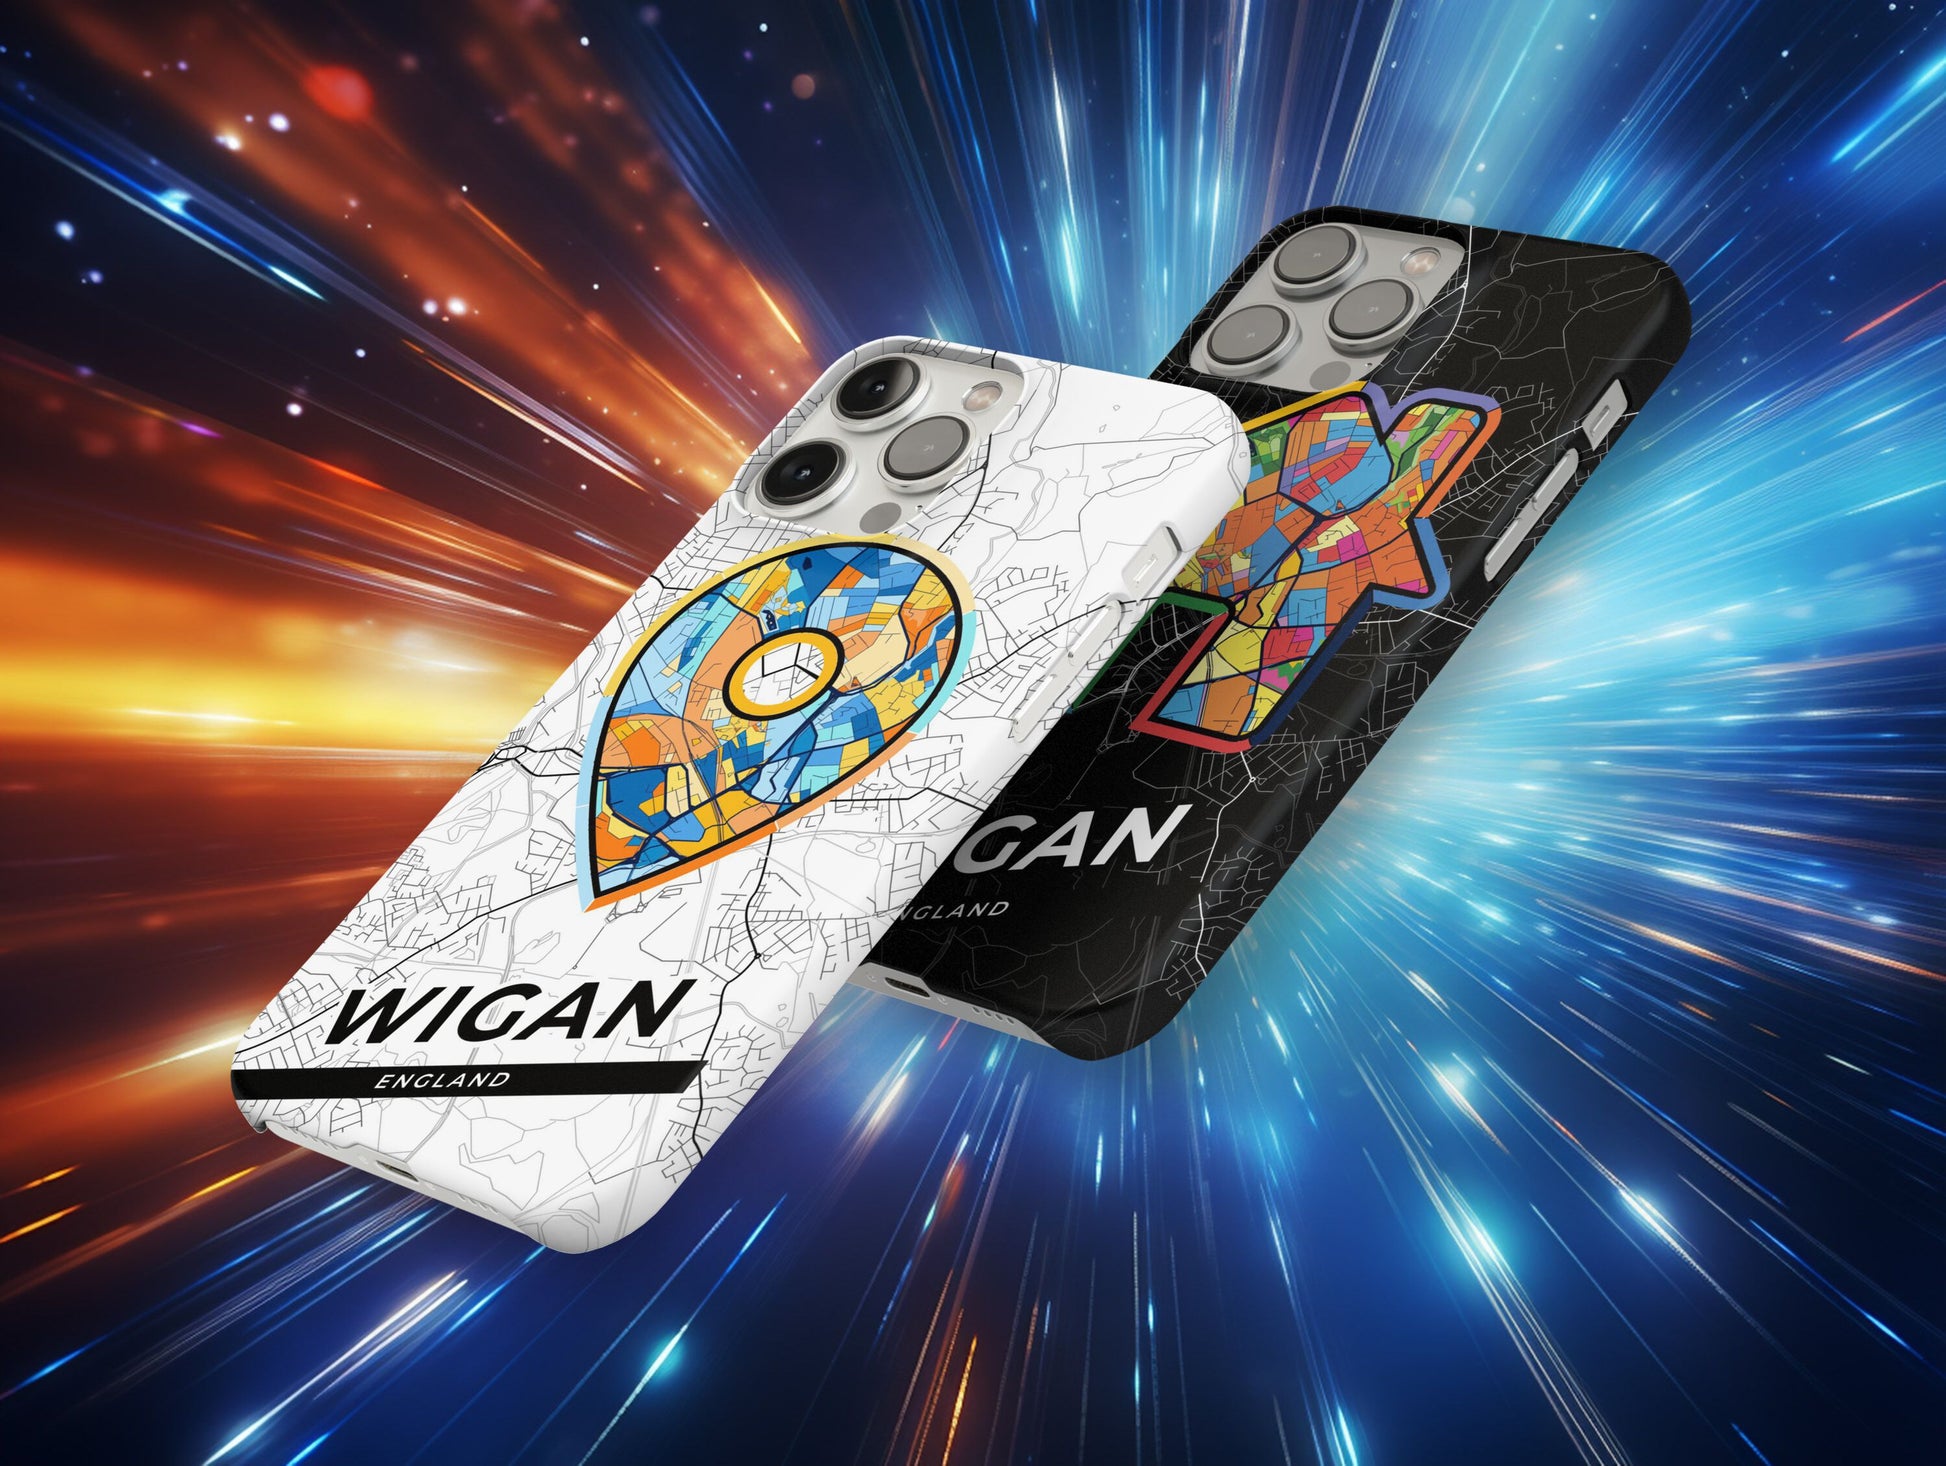 Wigan England slim phone case with colorful icon